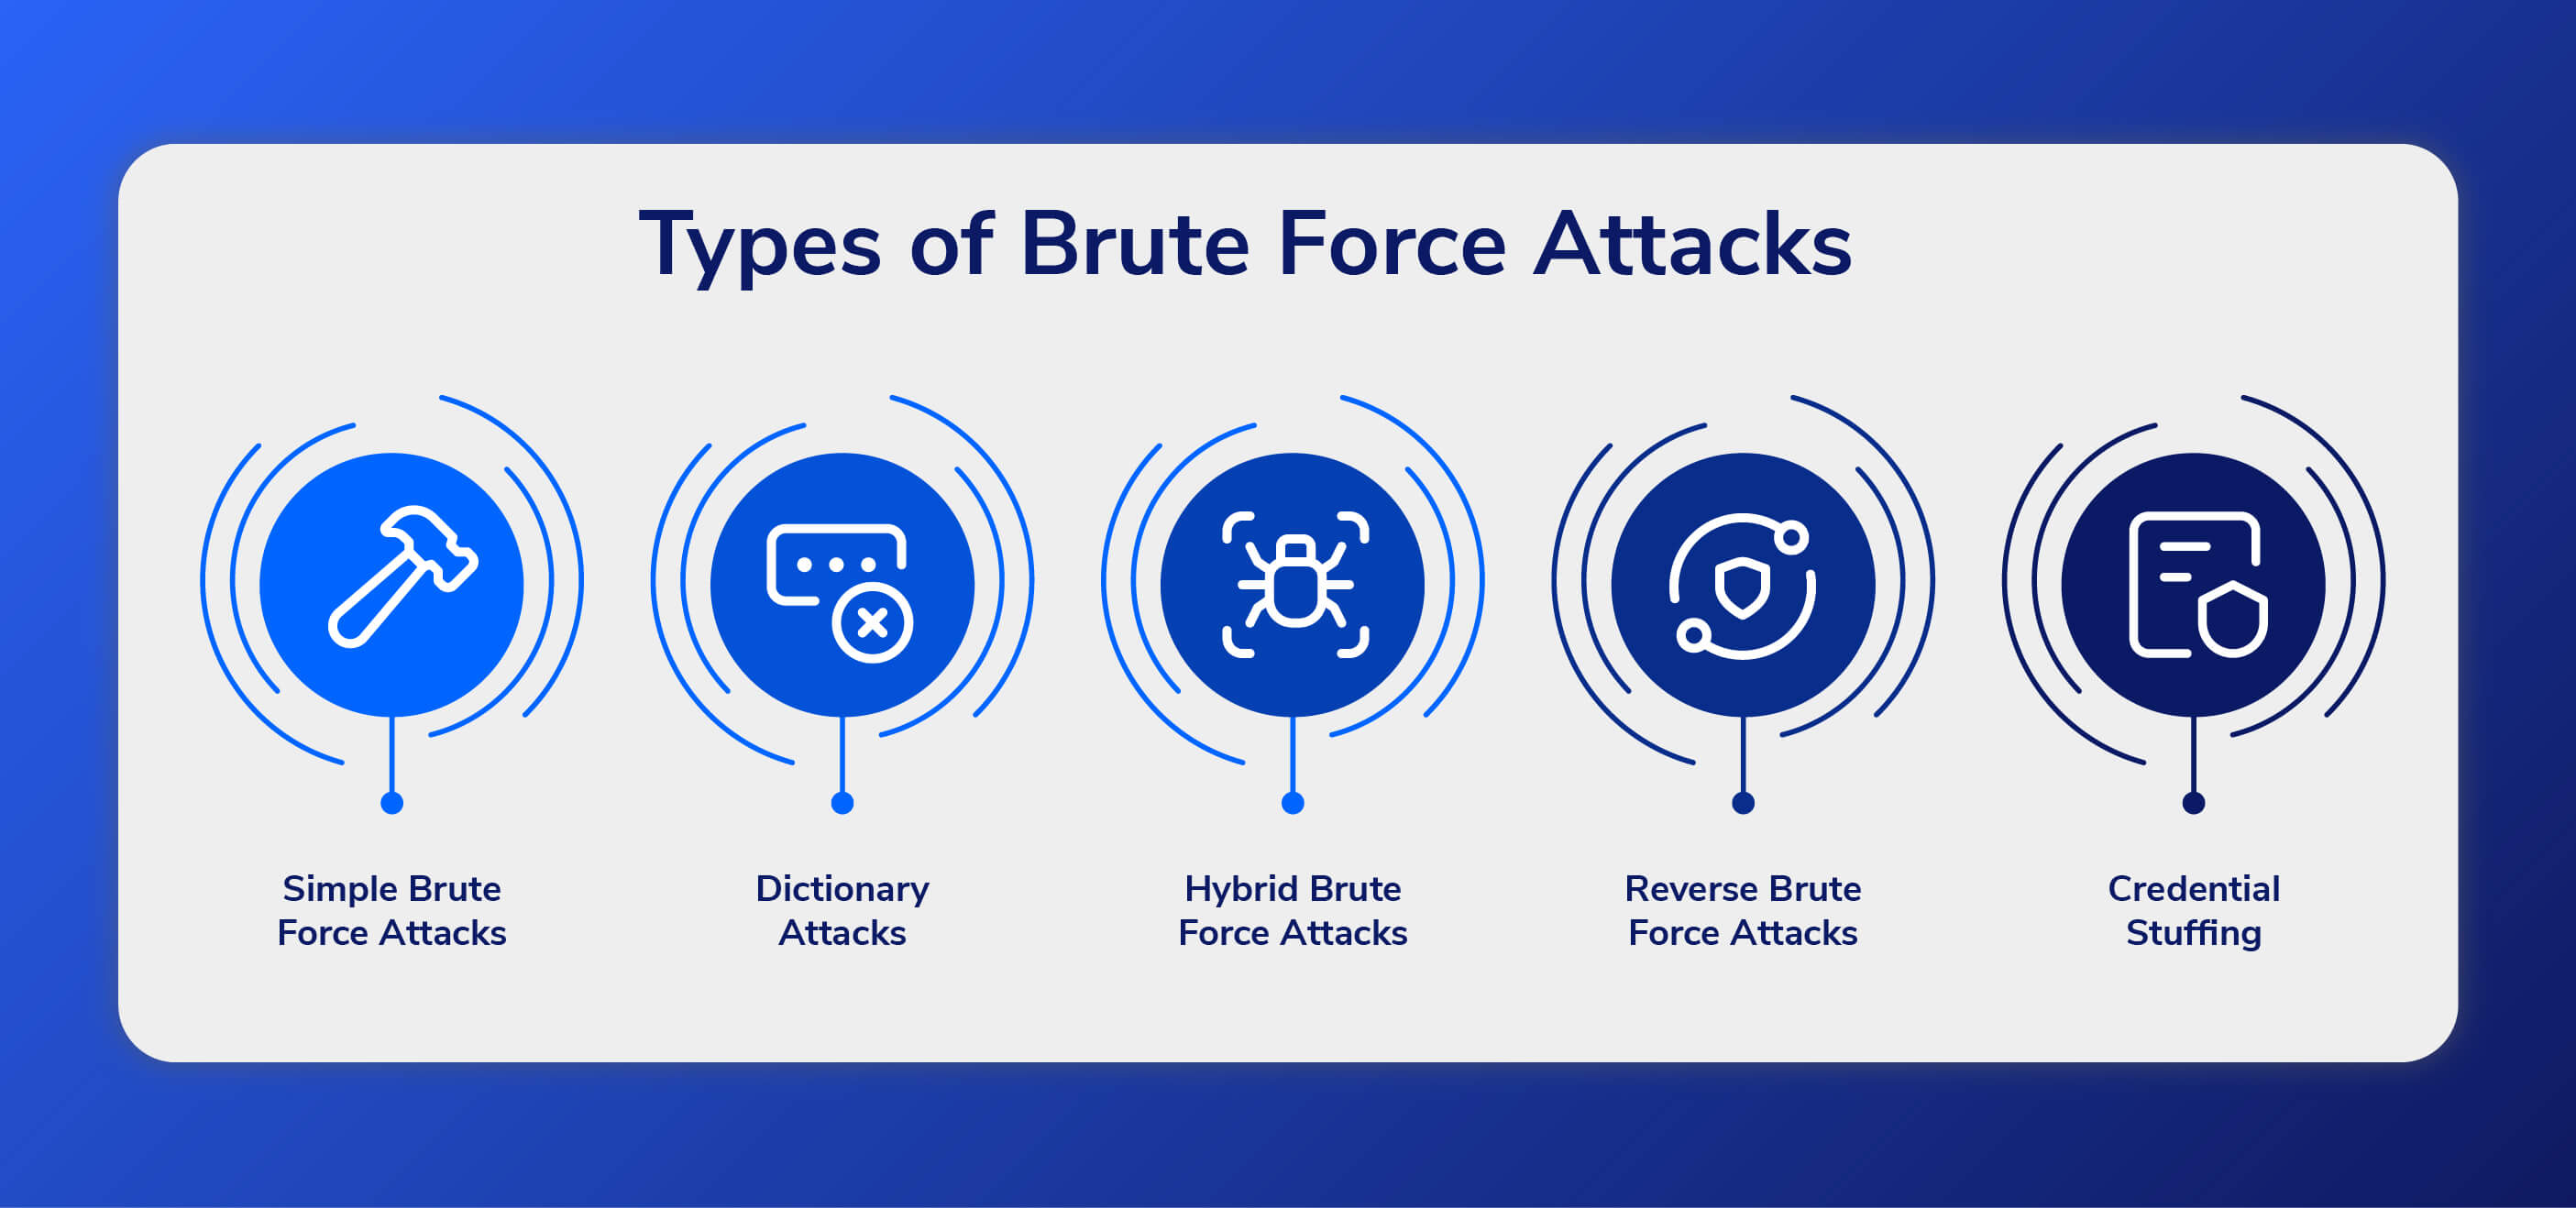 driehoek interferentie Vergelijking What Is a Brute Force Attack? Definition, M.O., Types and Prevention